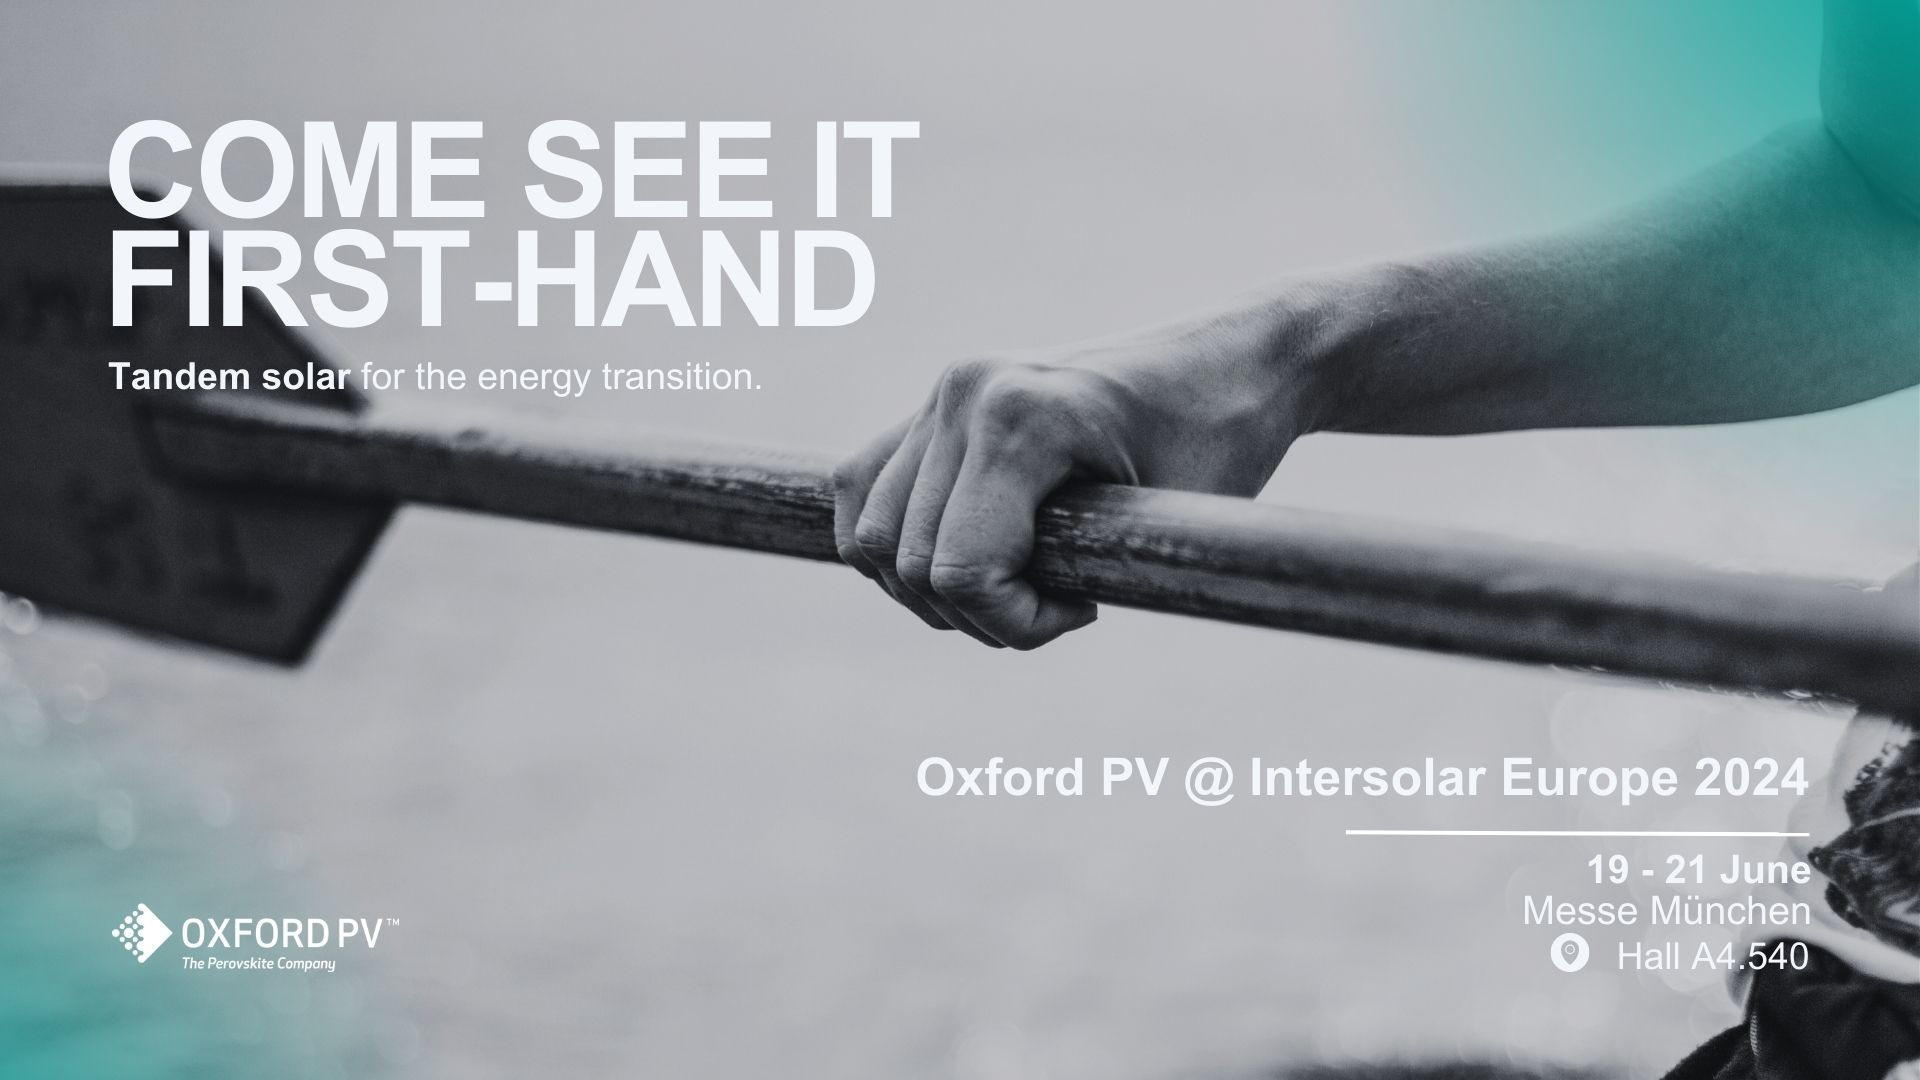 Come see Oxford PV first-hand at Intersolar Europe 2024